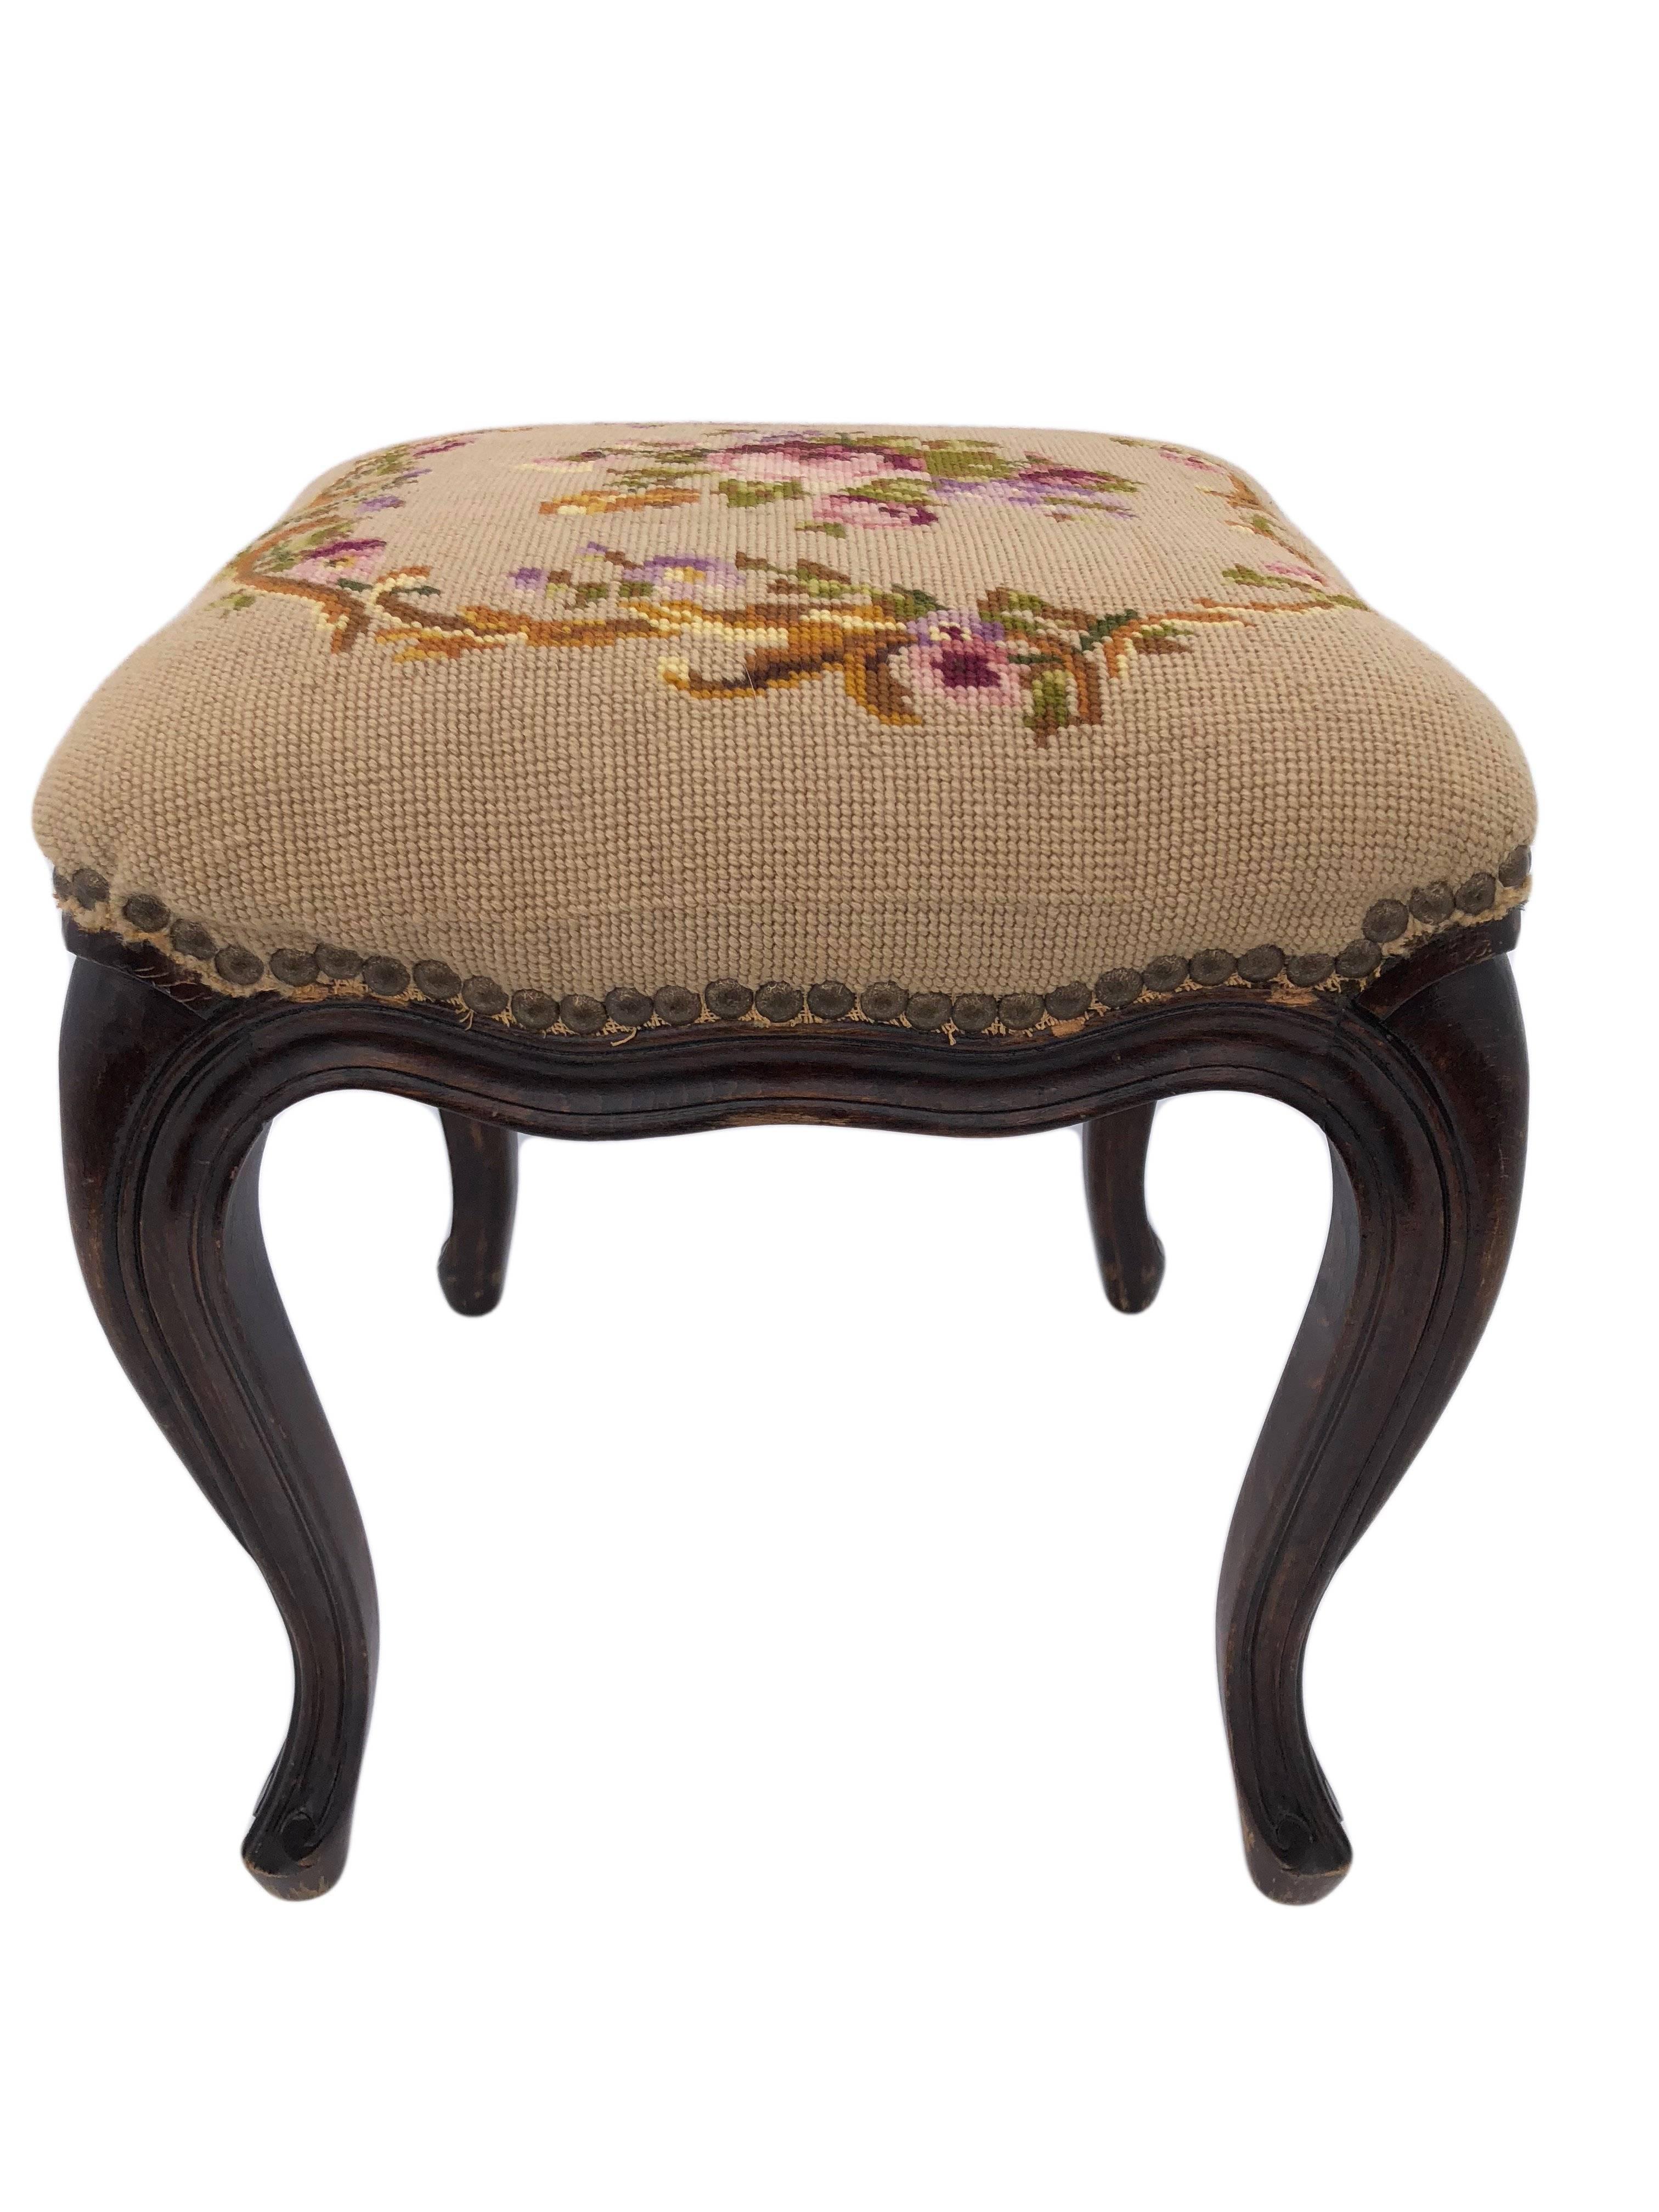 Louis XV French Wooden Square Foot Stool with Floral Embroidery and Cream, Early 1900s